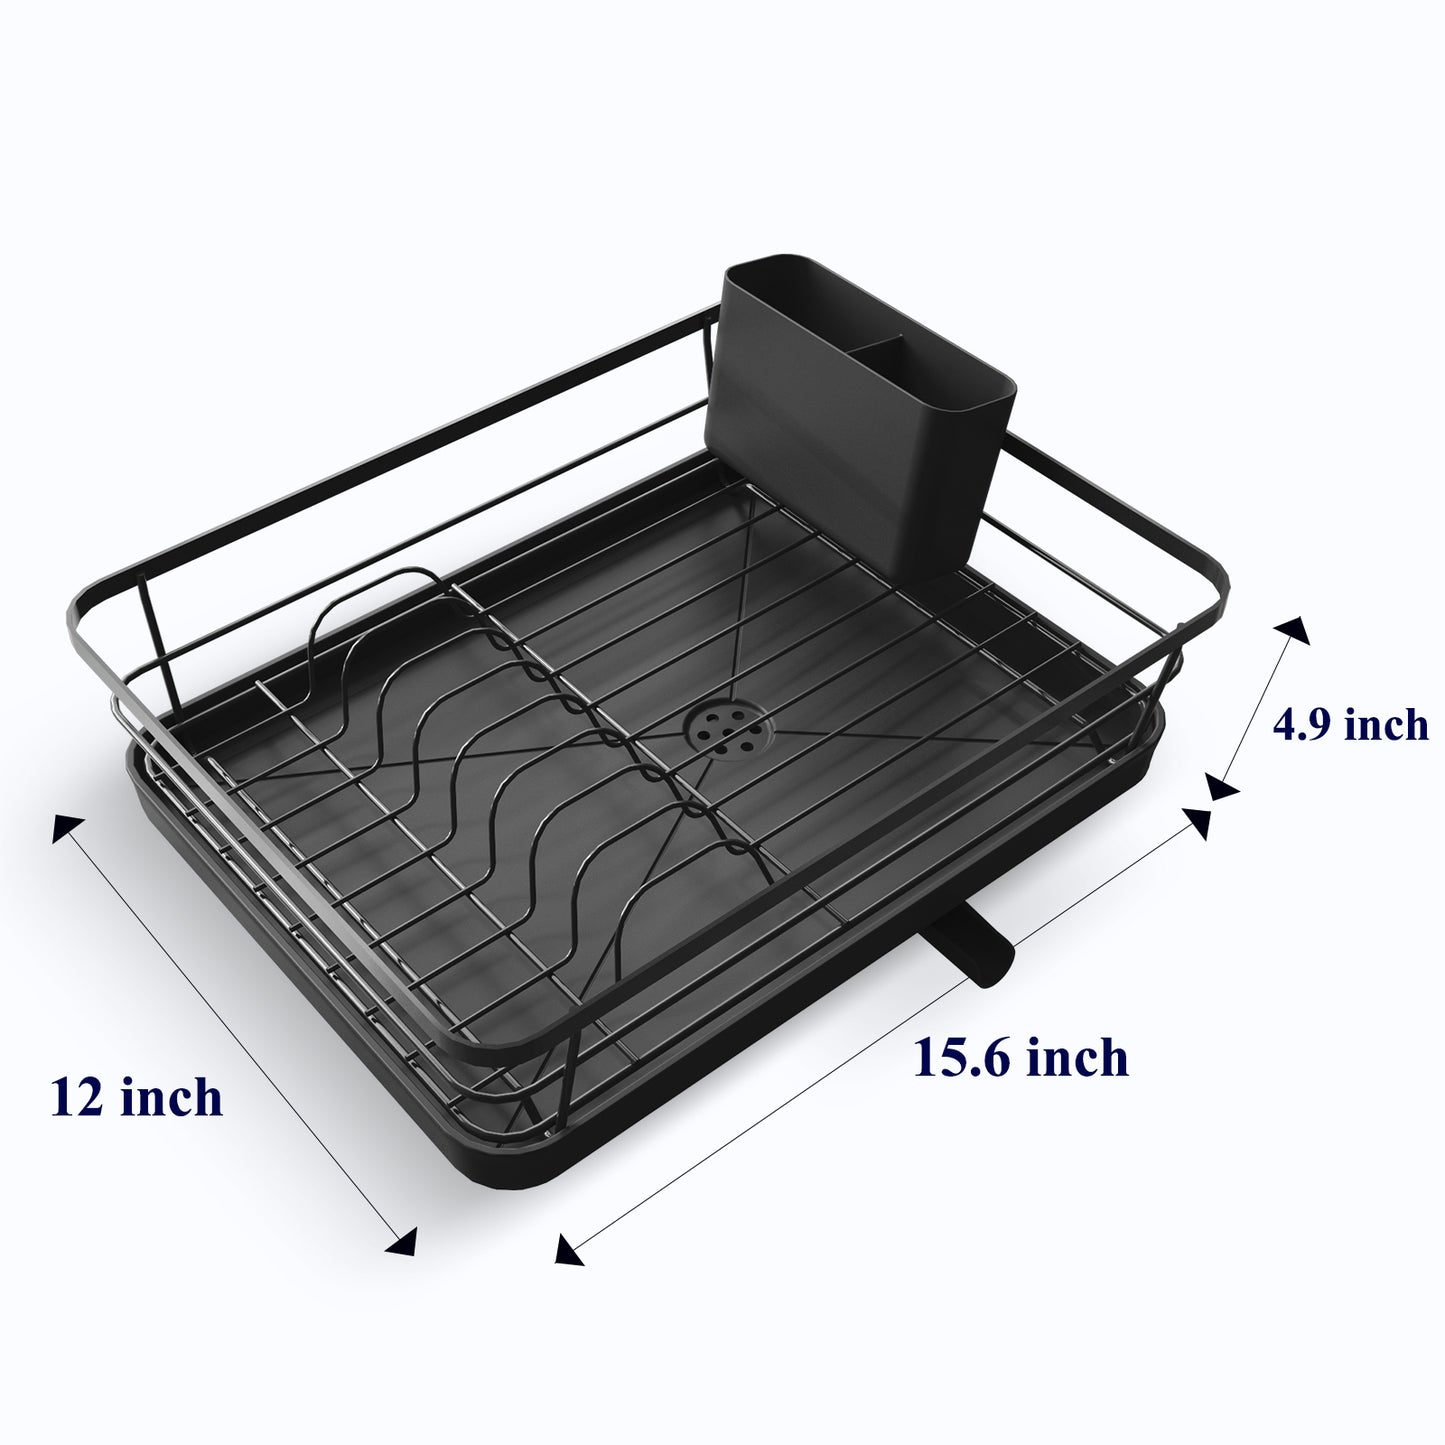 Kitsure Dish Drying Rack - Small Dish Racks for Kitchen Counter, Easy-to-Install Dish Rack with Adjustable Water Outlet, Stainless Steel Dish Drainers for Kitchen Counter, Drying Rack for Kitchen （4004）